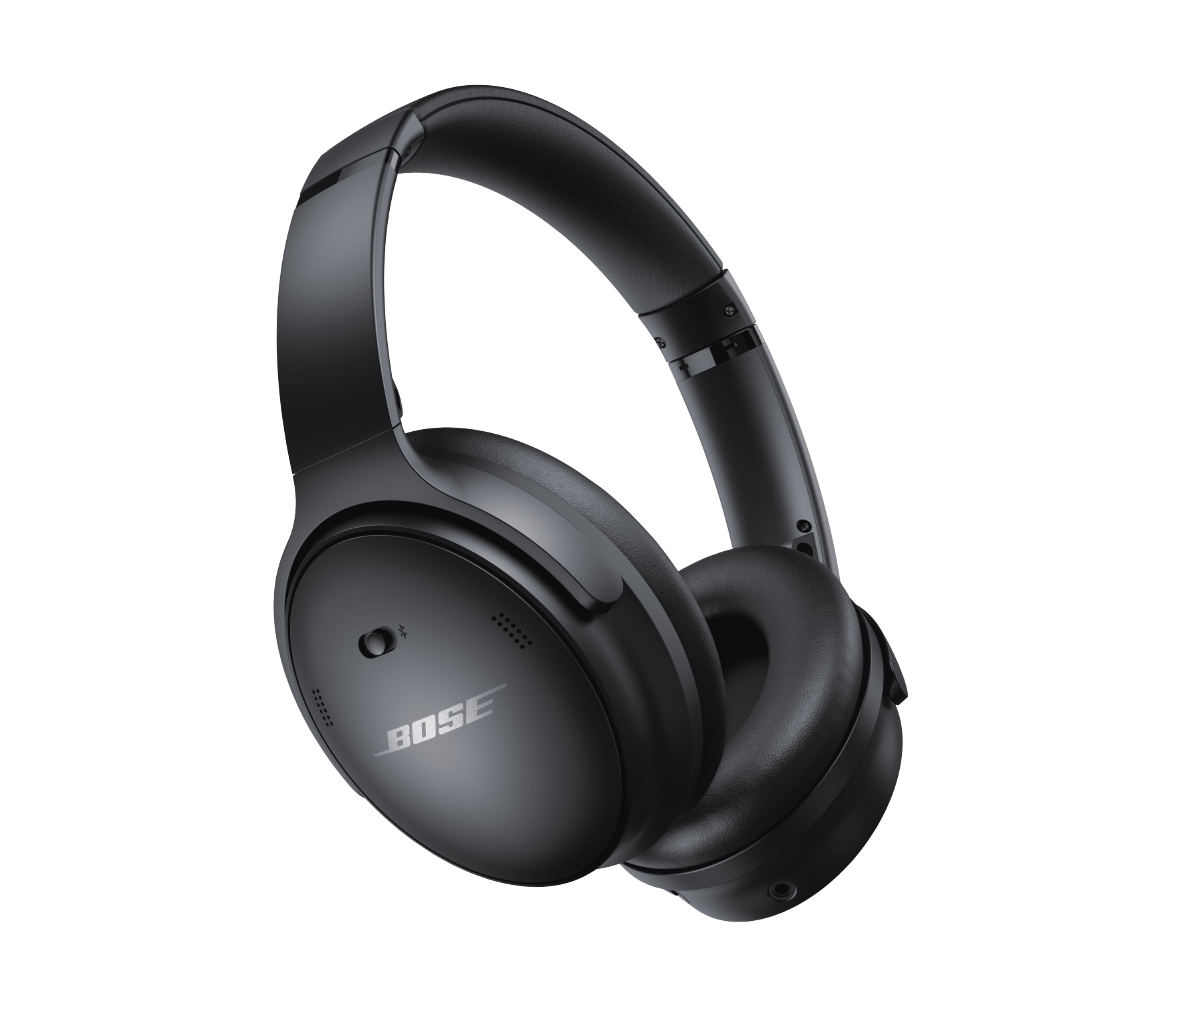 Product & Troubleshooting and Help Articles | Bose